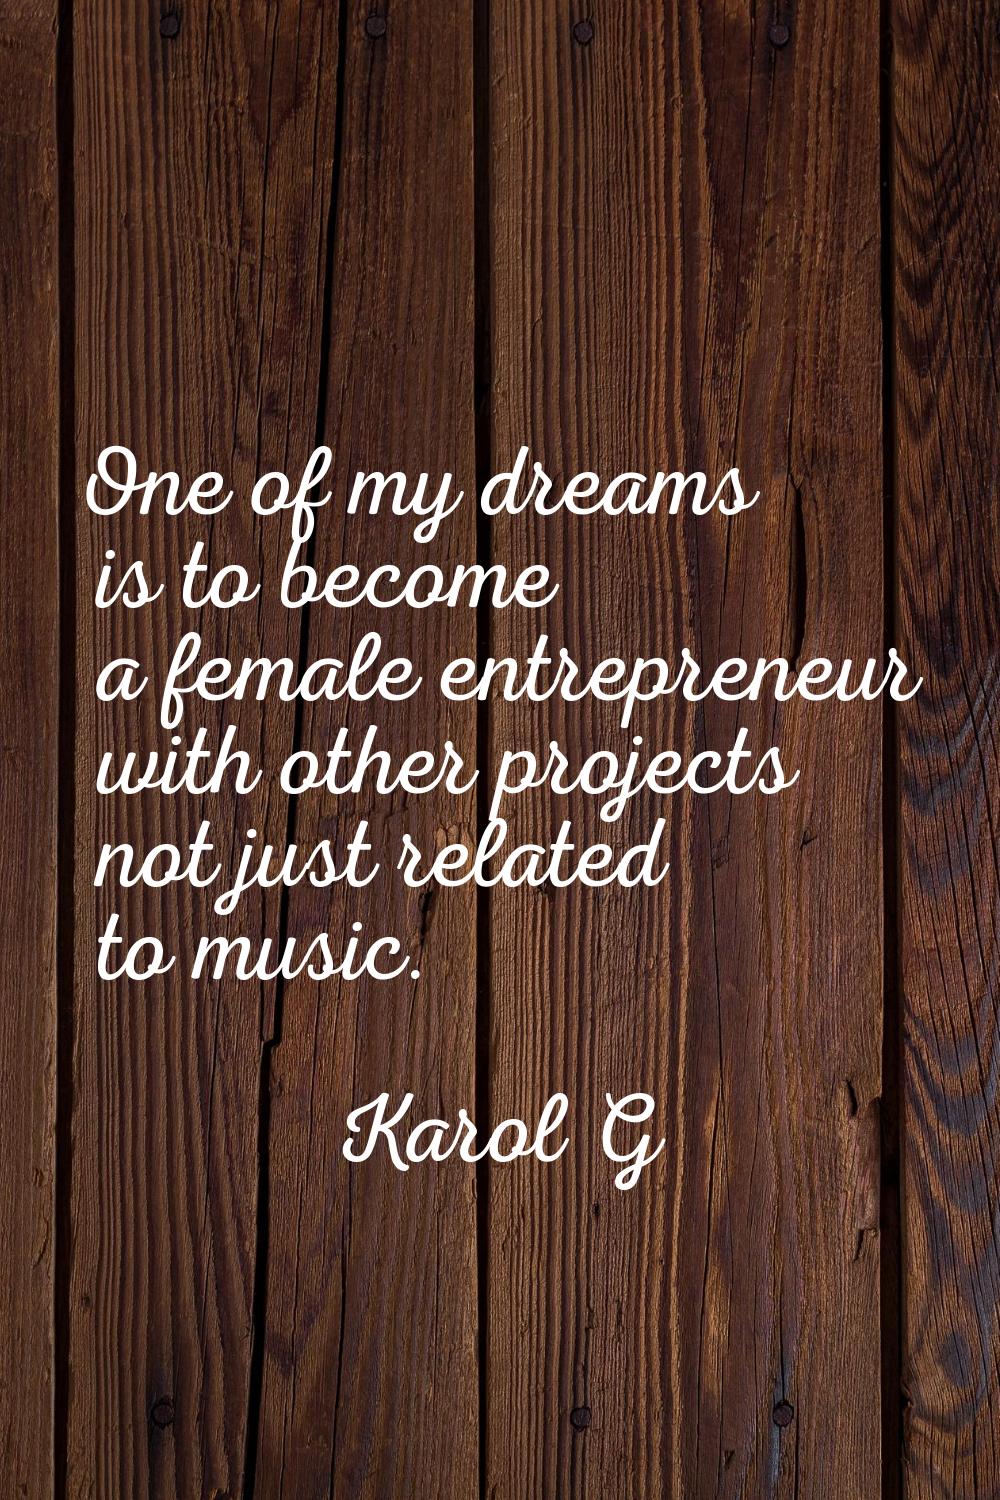 One of my dreams is to become a female entrepreneur with other projects not just related to music.